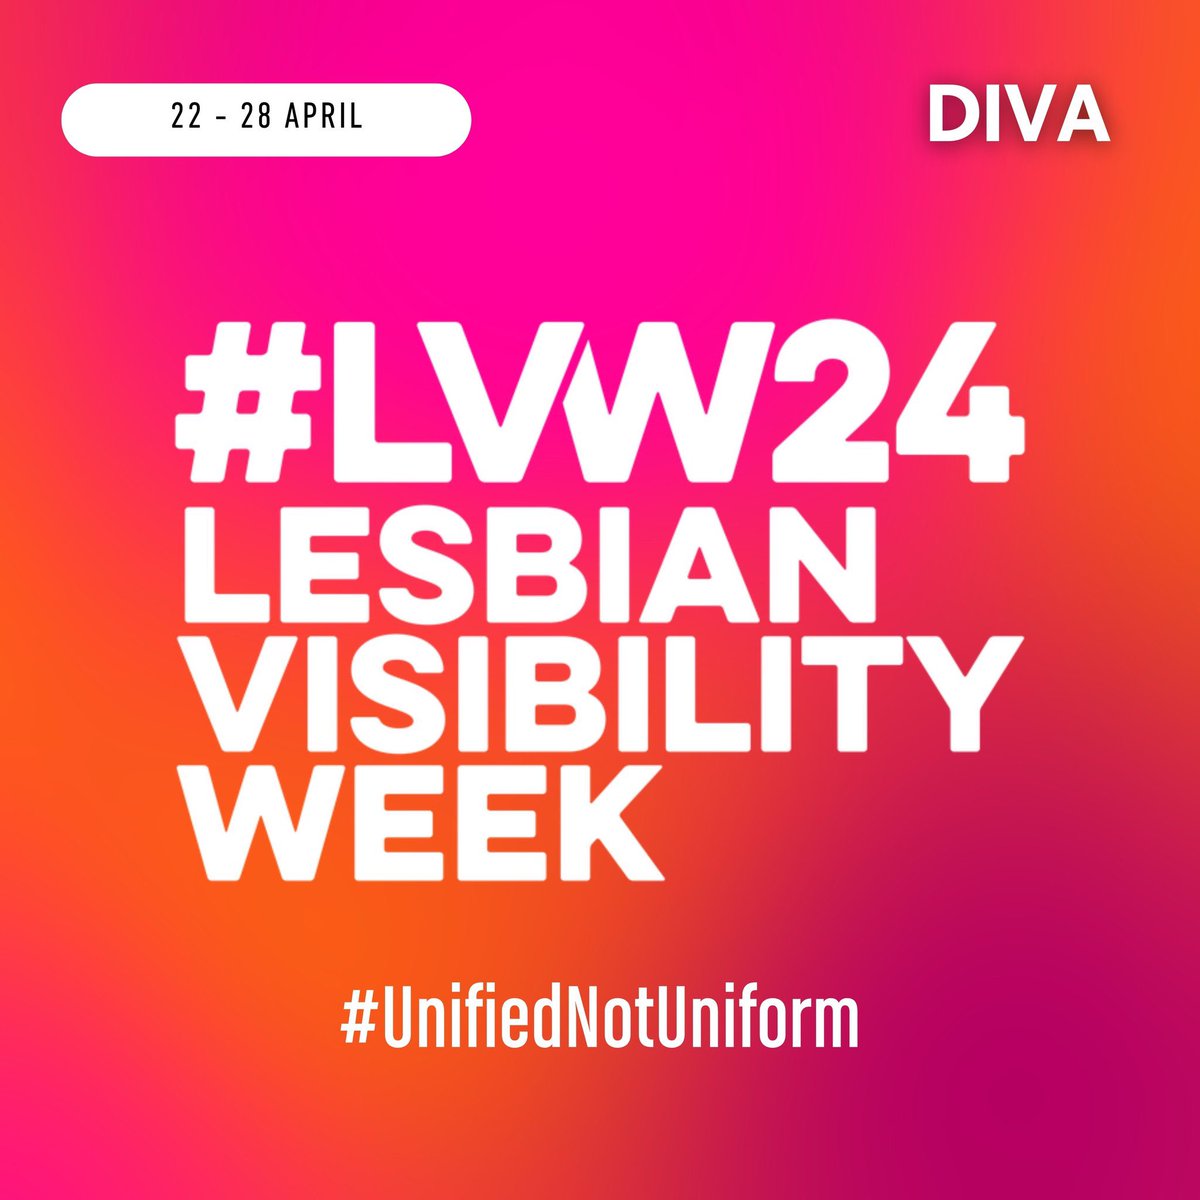 🧡🤍💗 Happy #LesbianVisibilityWeek to our members and all those #WBA fans that put the L in LGBTQ+.

#LVW24 | #UnifiedNotUniform